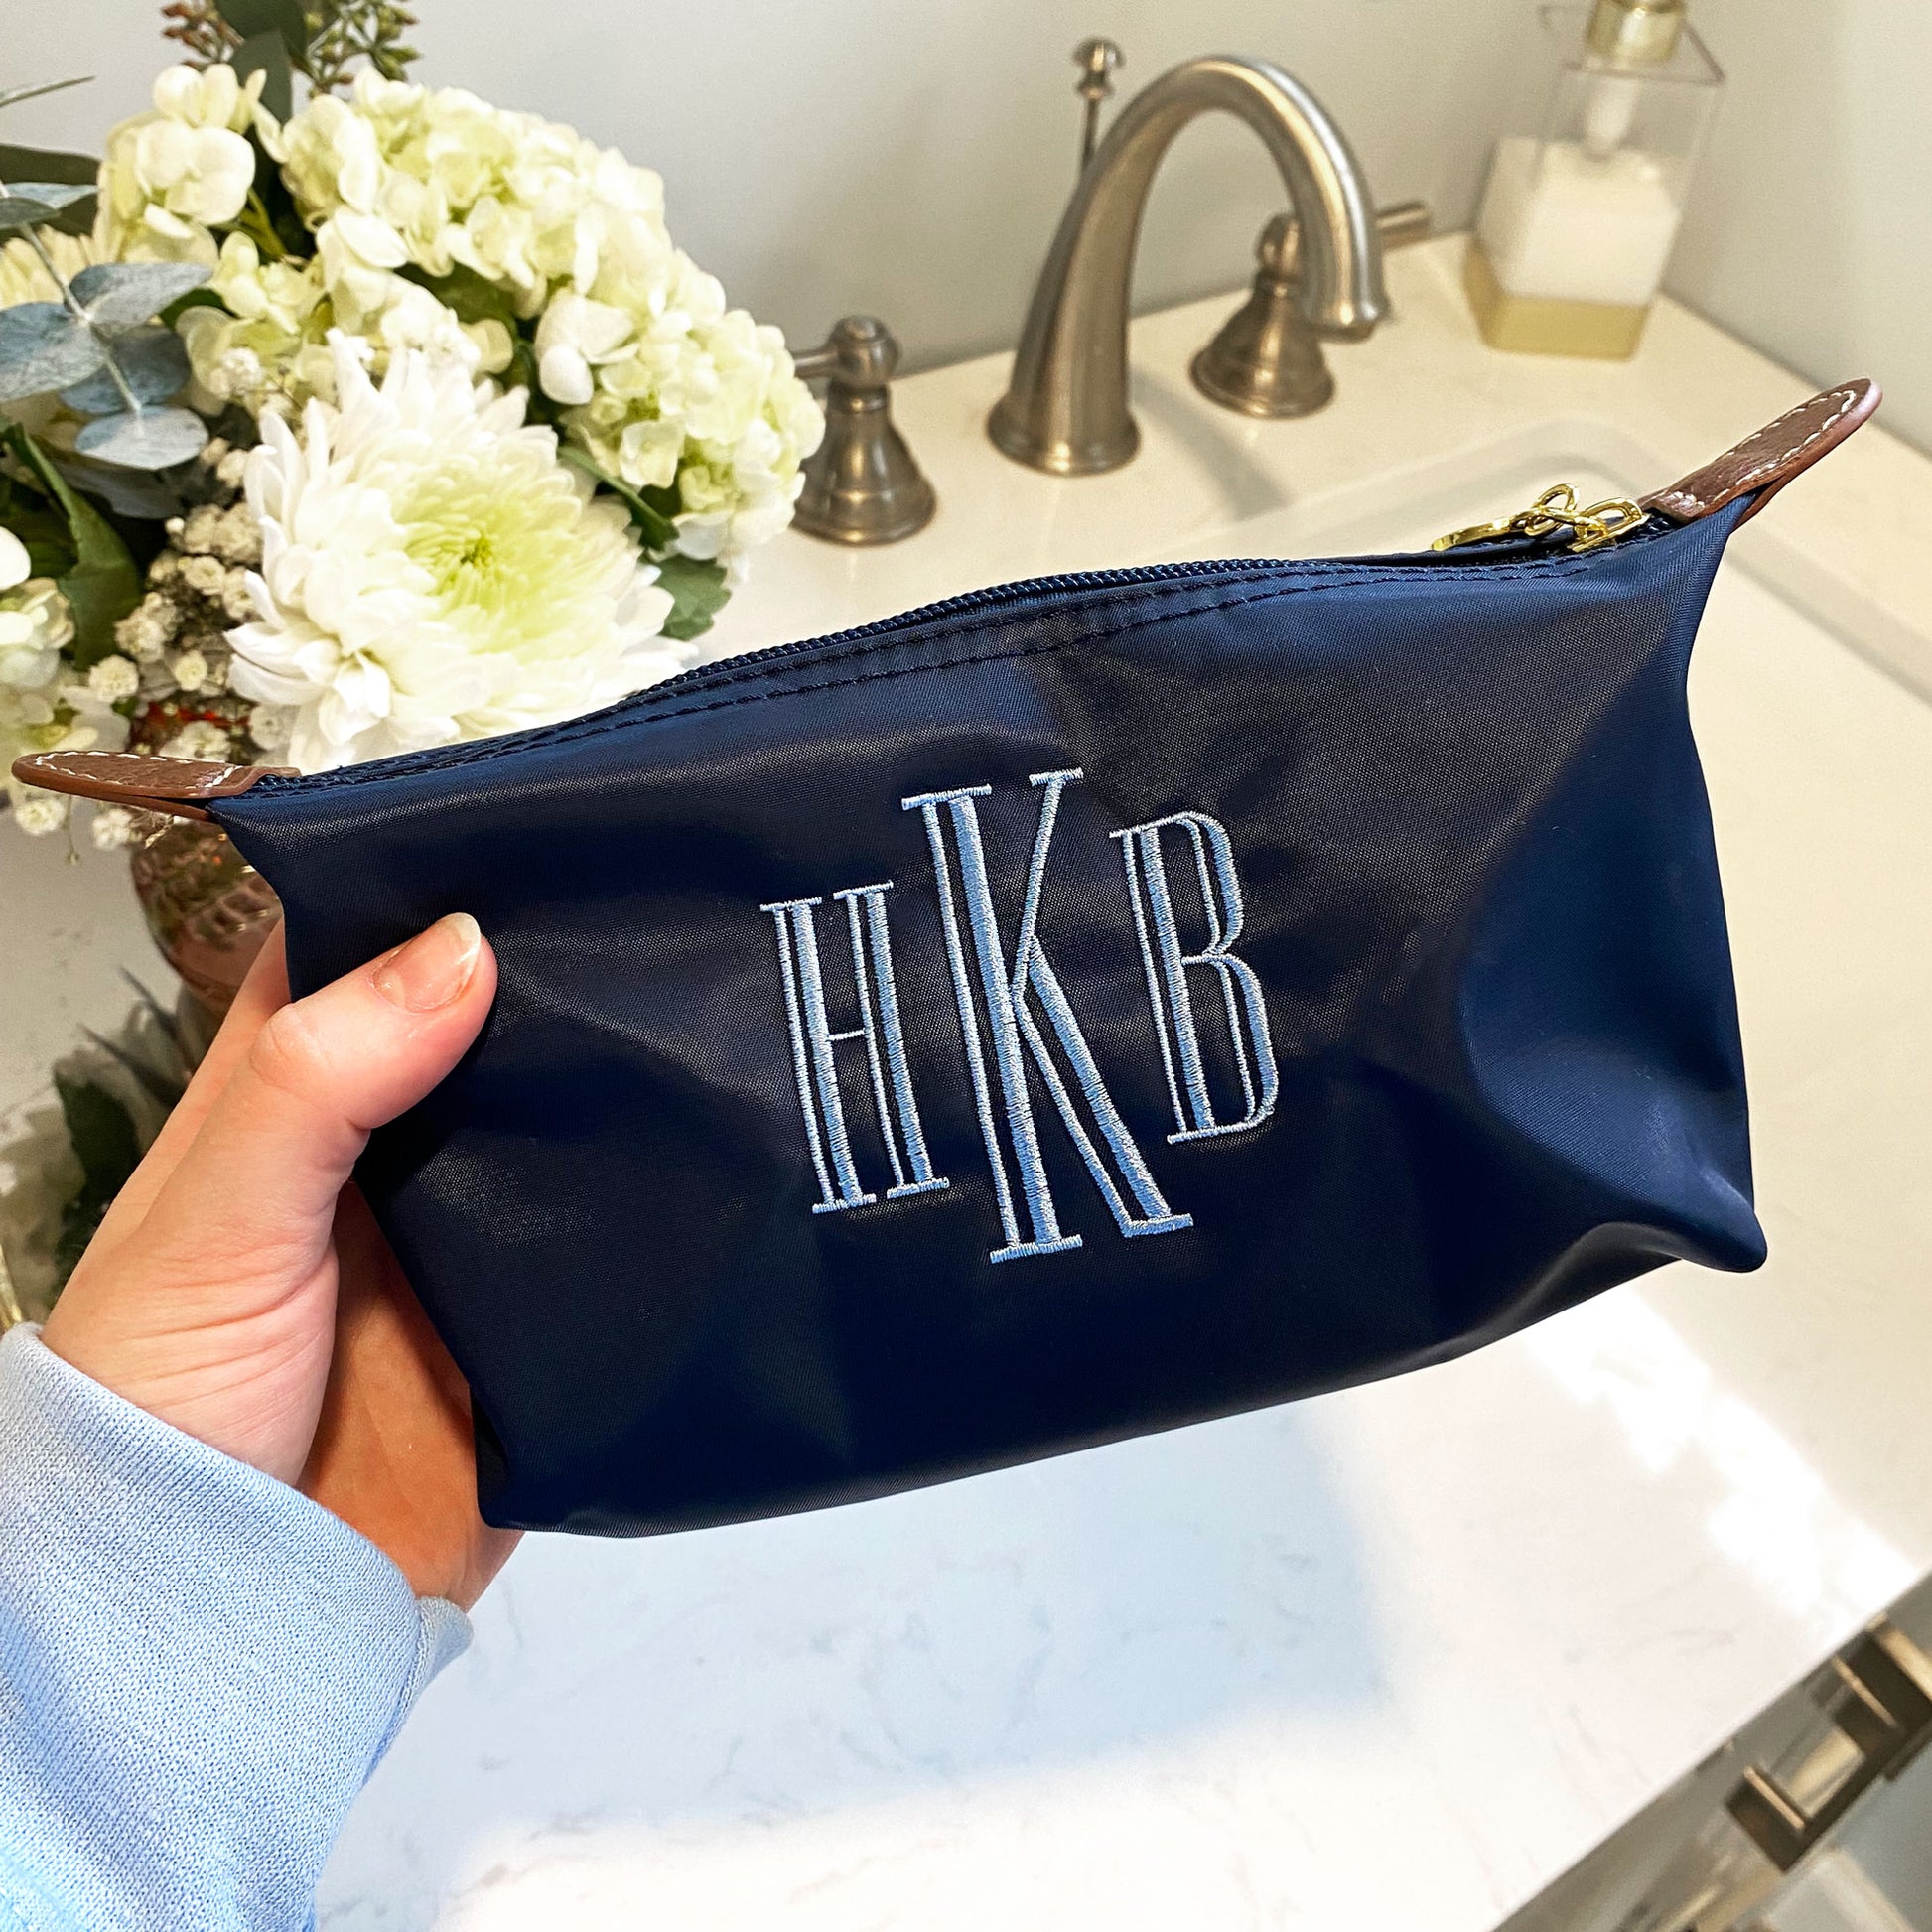 hkb embroidered nylon navy makeup pouch